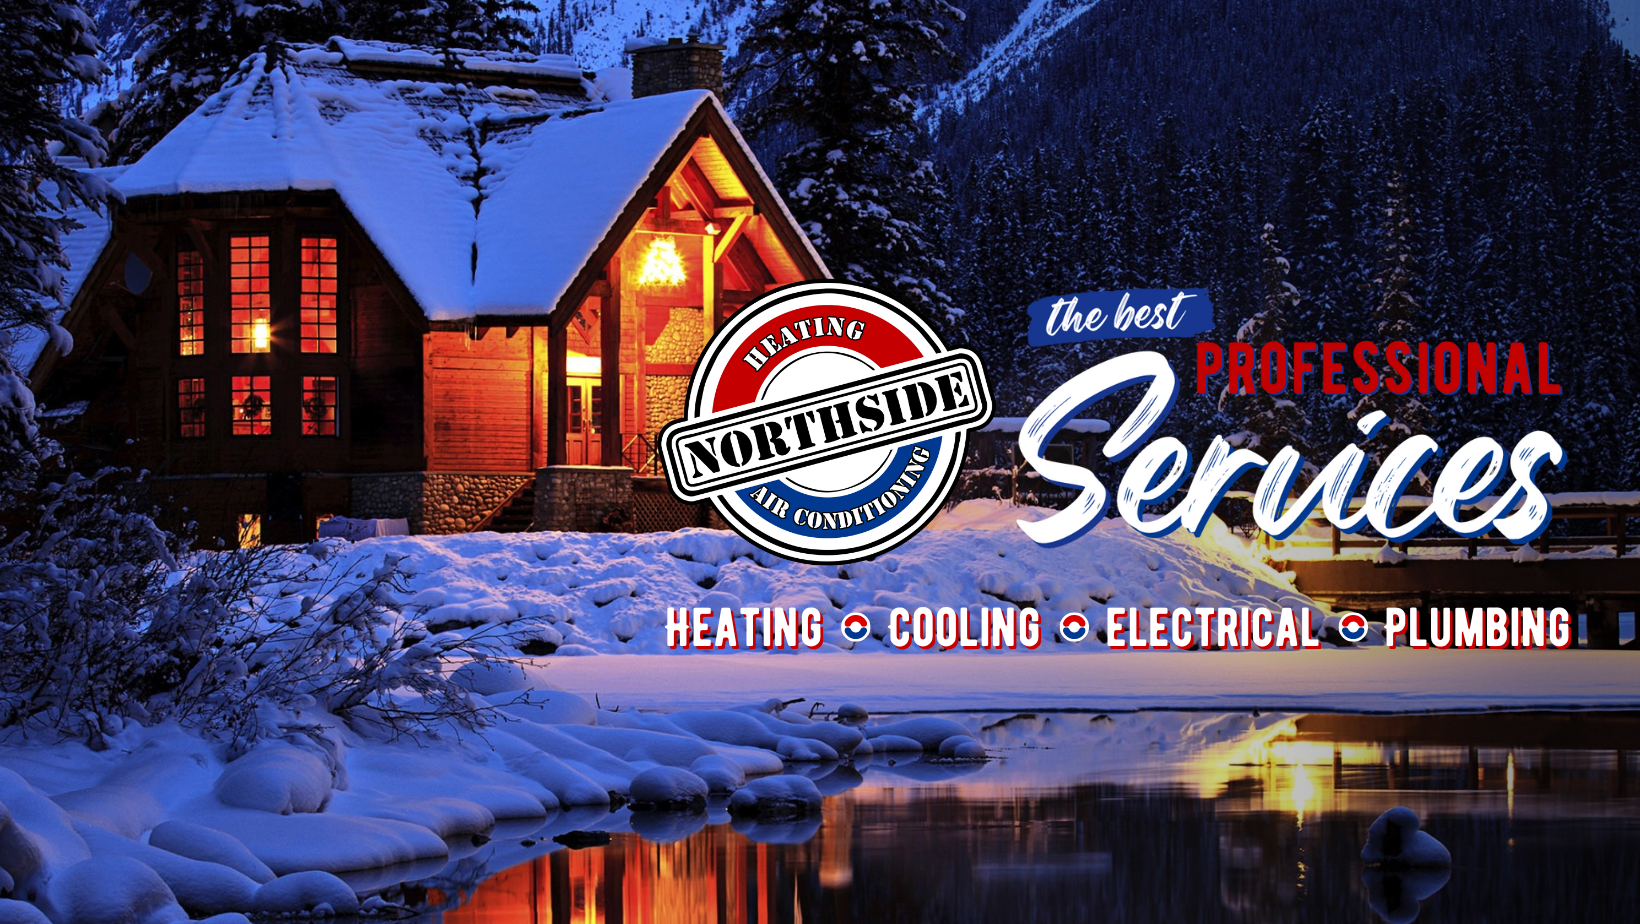 Northside Heating & Air Conditioning - Colville, Wa 645 N Lincoln St, Colville Washington 99114